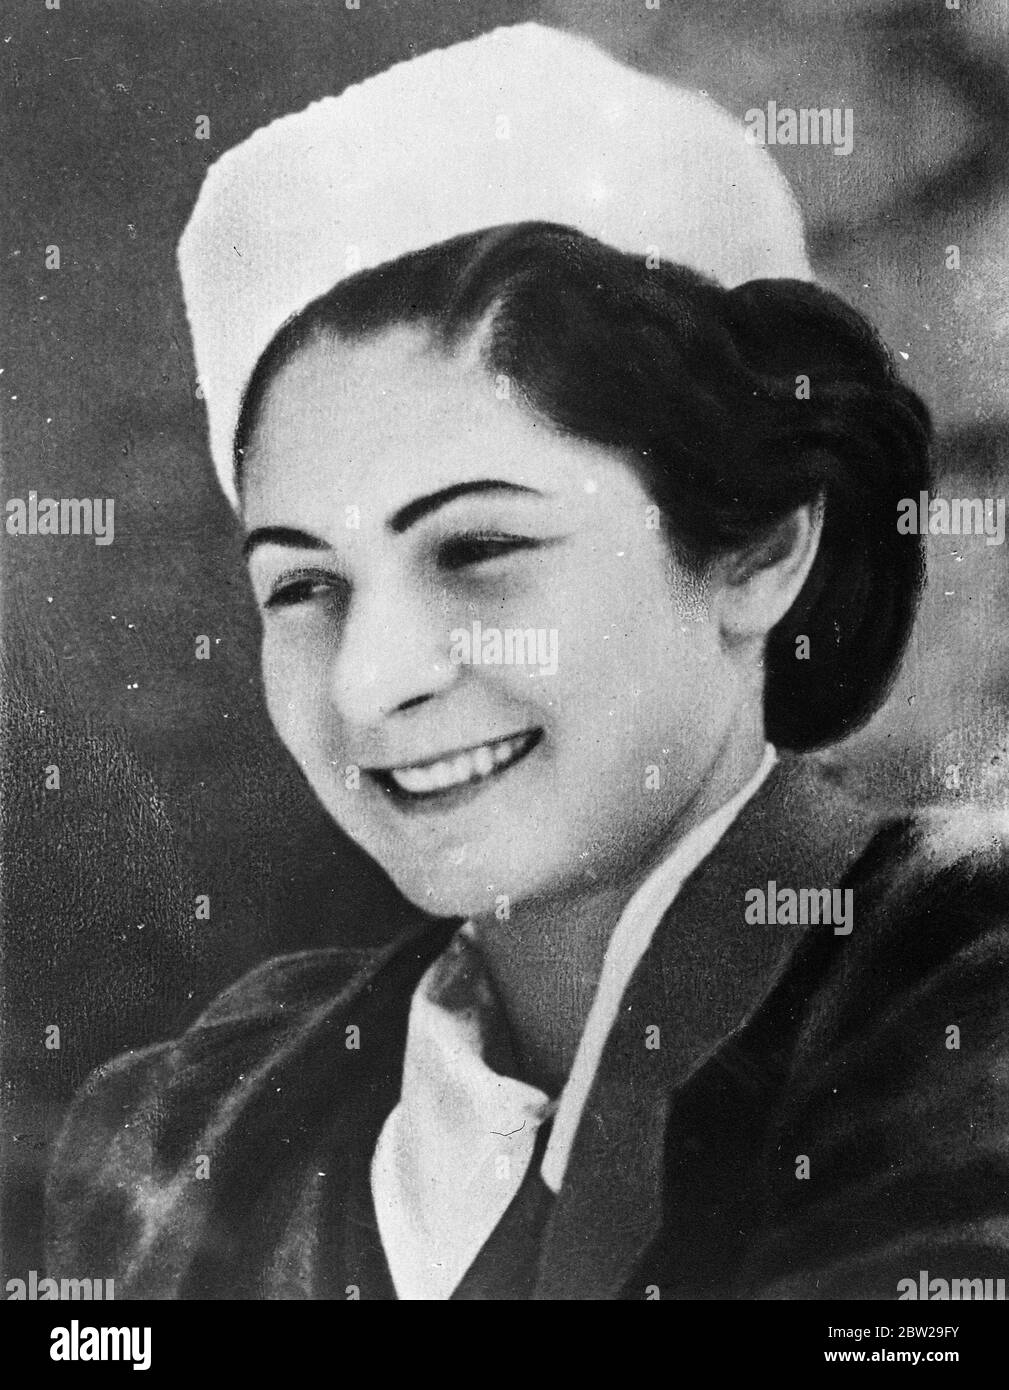 King Farouk to marry in January. Mlle Farida Zulficar, fiancee of the young King Farouk of Egypt. The wedding of the boy king will take place in the first week of January 1938, at Montaza Palace, his summer residence near Alexandria. In accordance with the customer. It is possible that the bride will not be present at the ceremony. Stock Photo